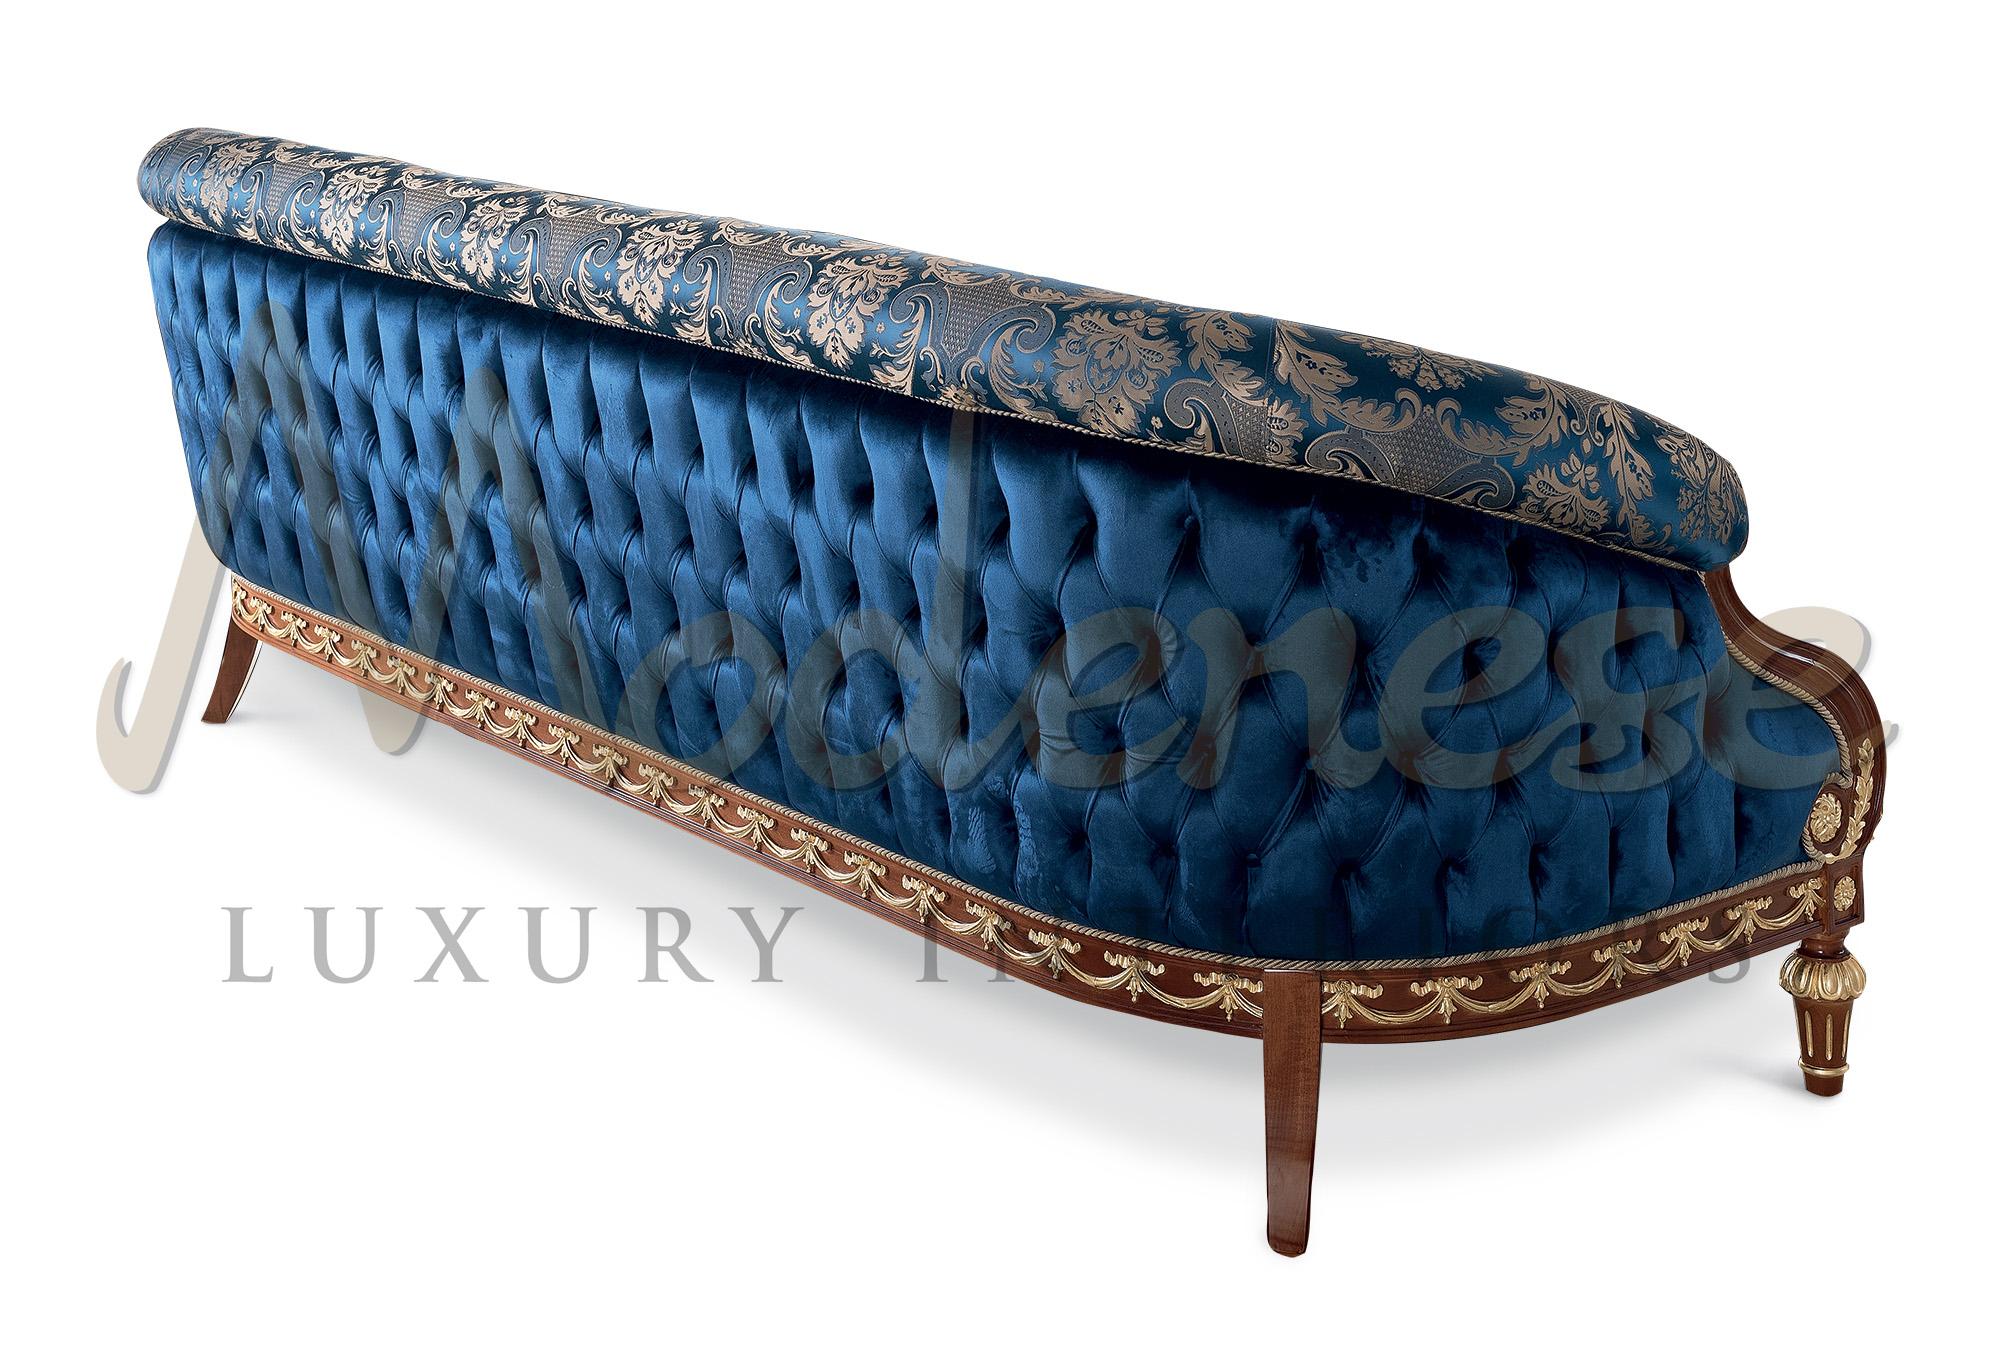 Italian Blue Royal Palace Classic Sofa in Exclusive Cherry Wood and Gold Leaf Appliqué For Sale